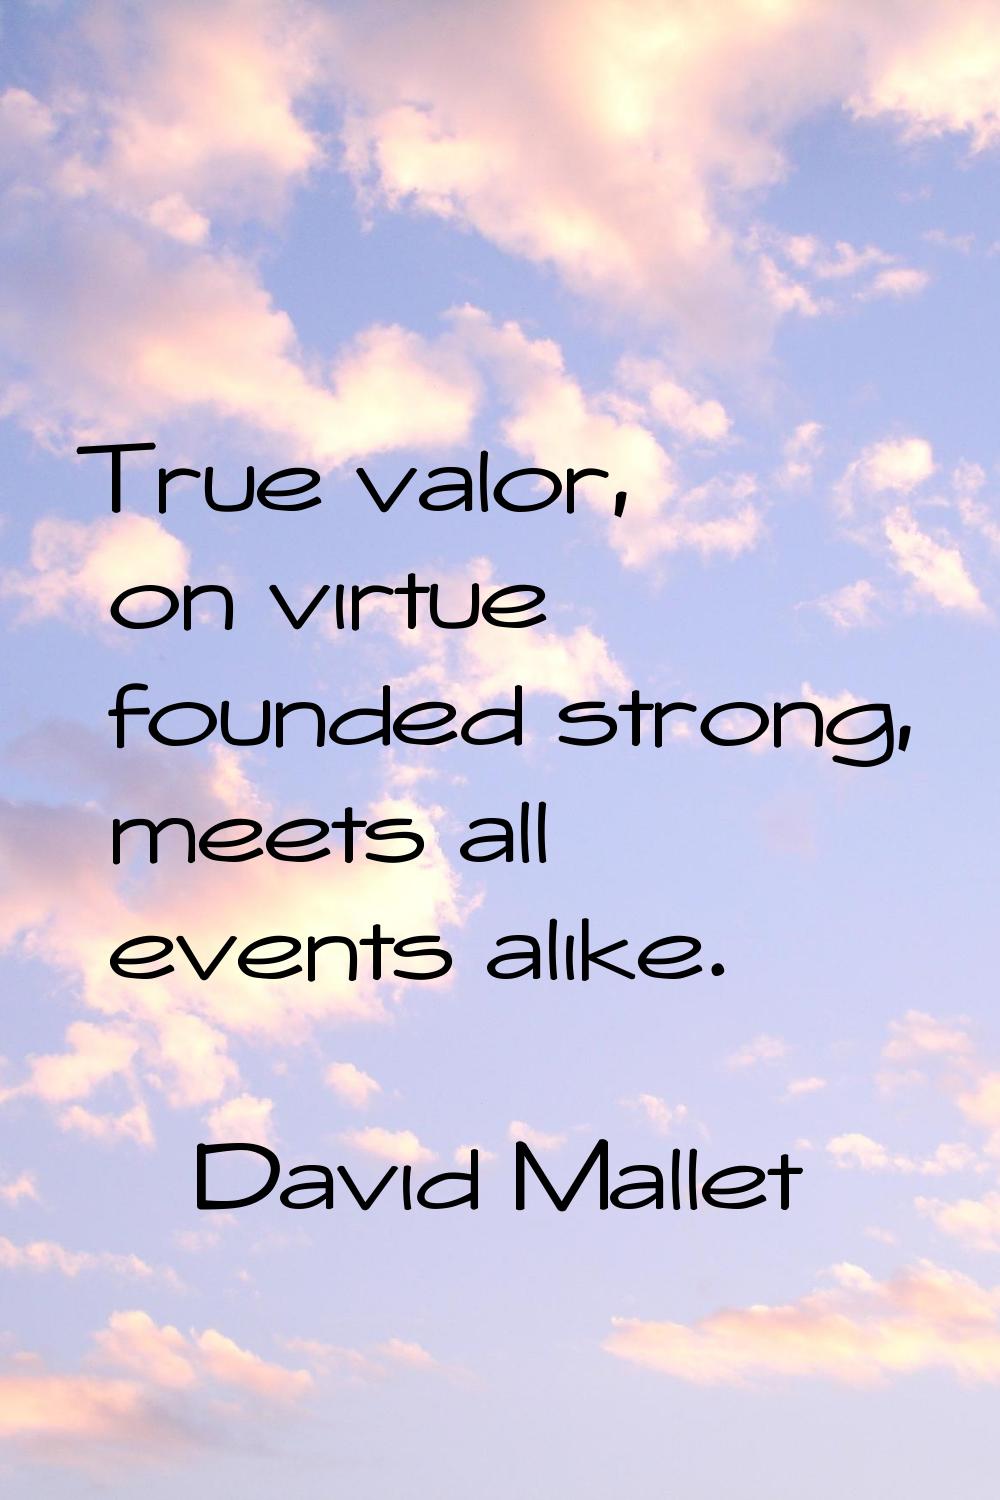 True valor, on virtue founded strong, meets all events alike.